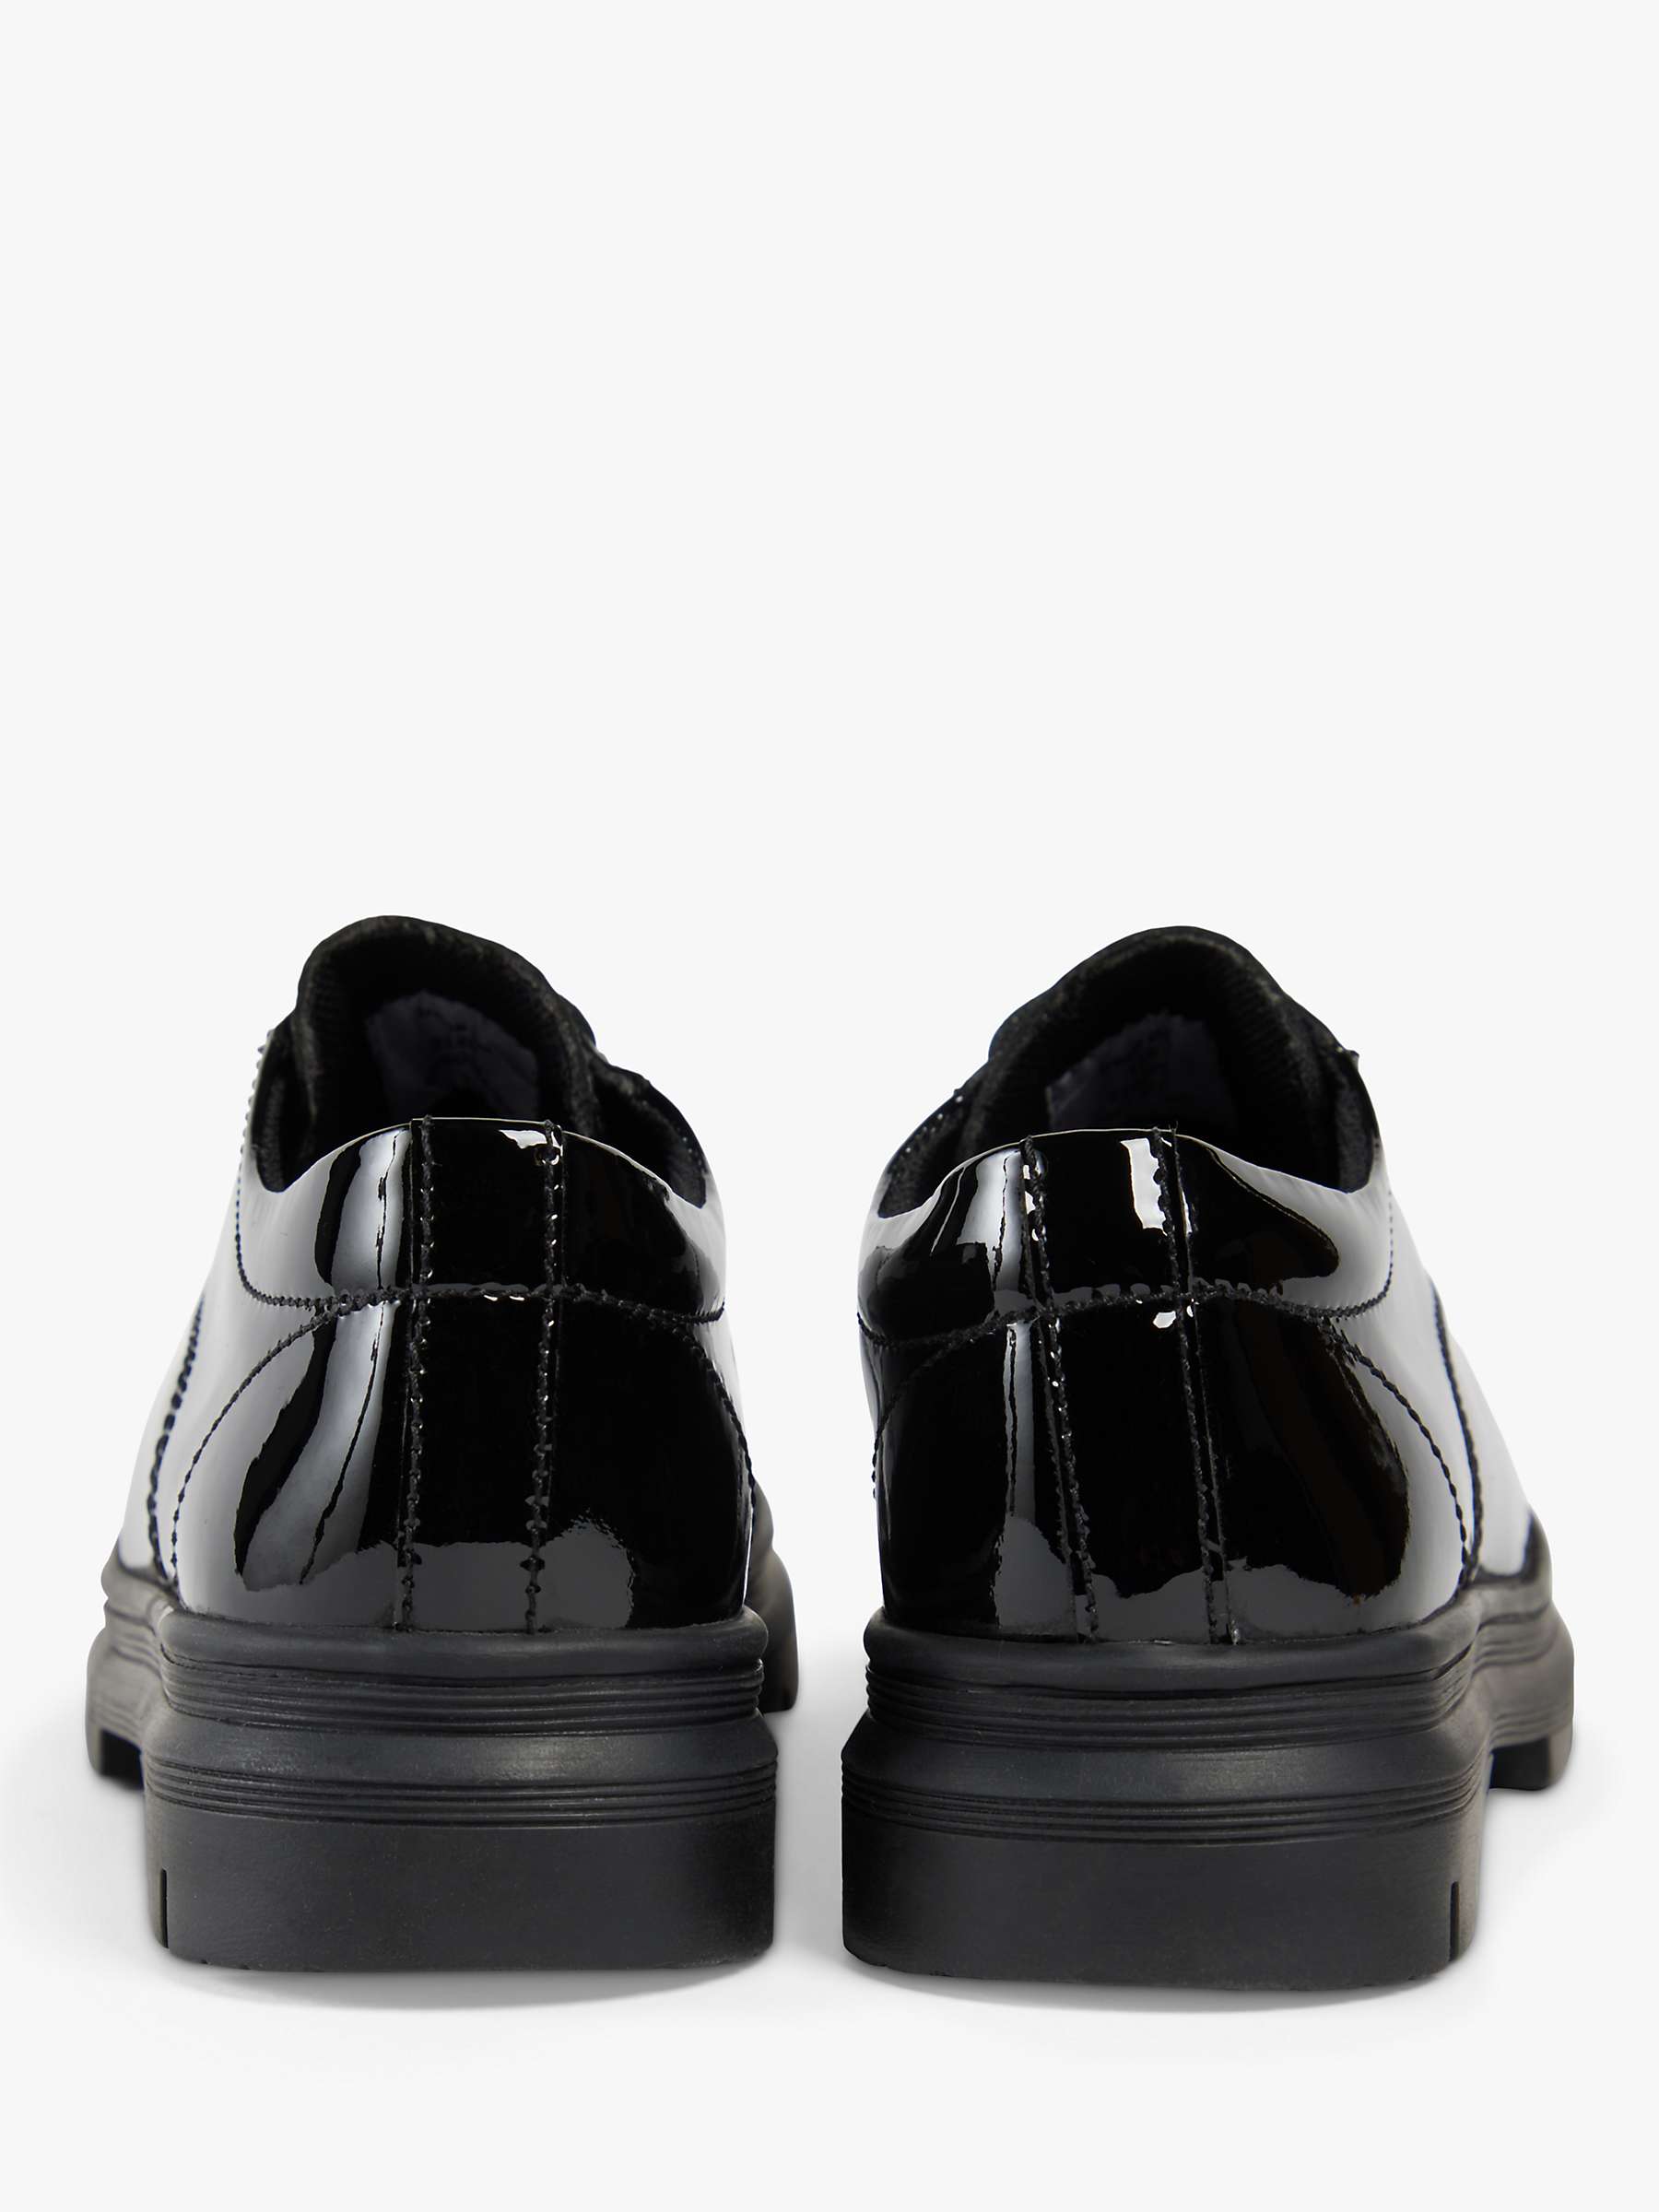 Buy Pod Kids' Irene Patent Leather Lace Up Shoes, Black Online at johnlewis.com